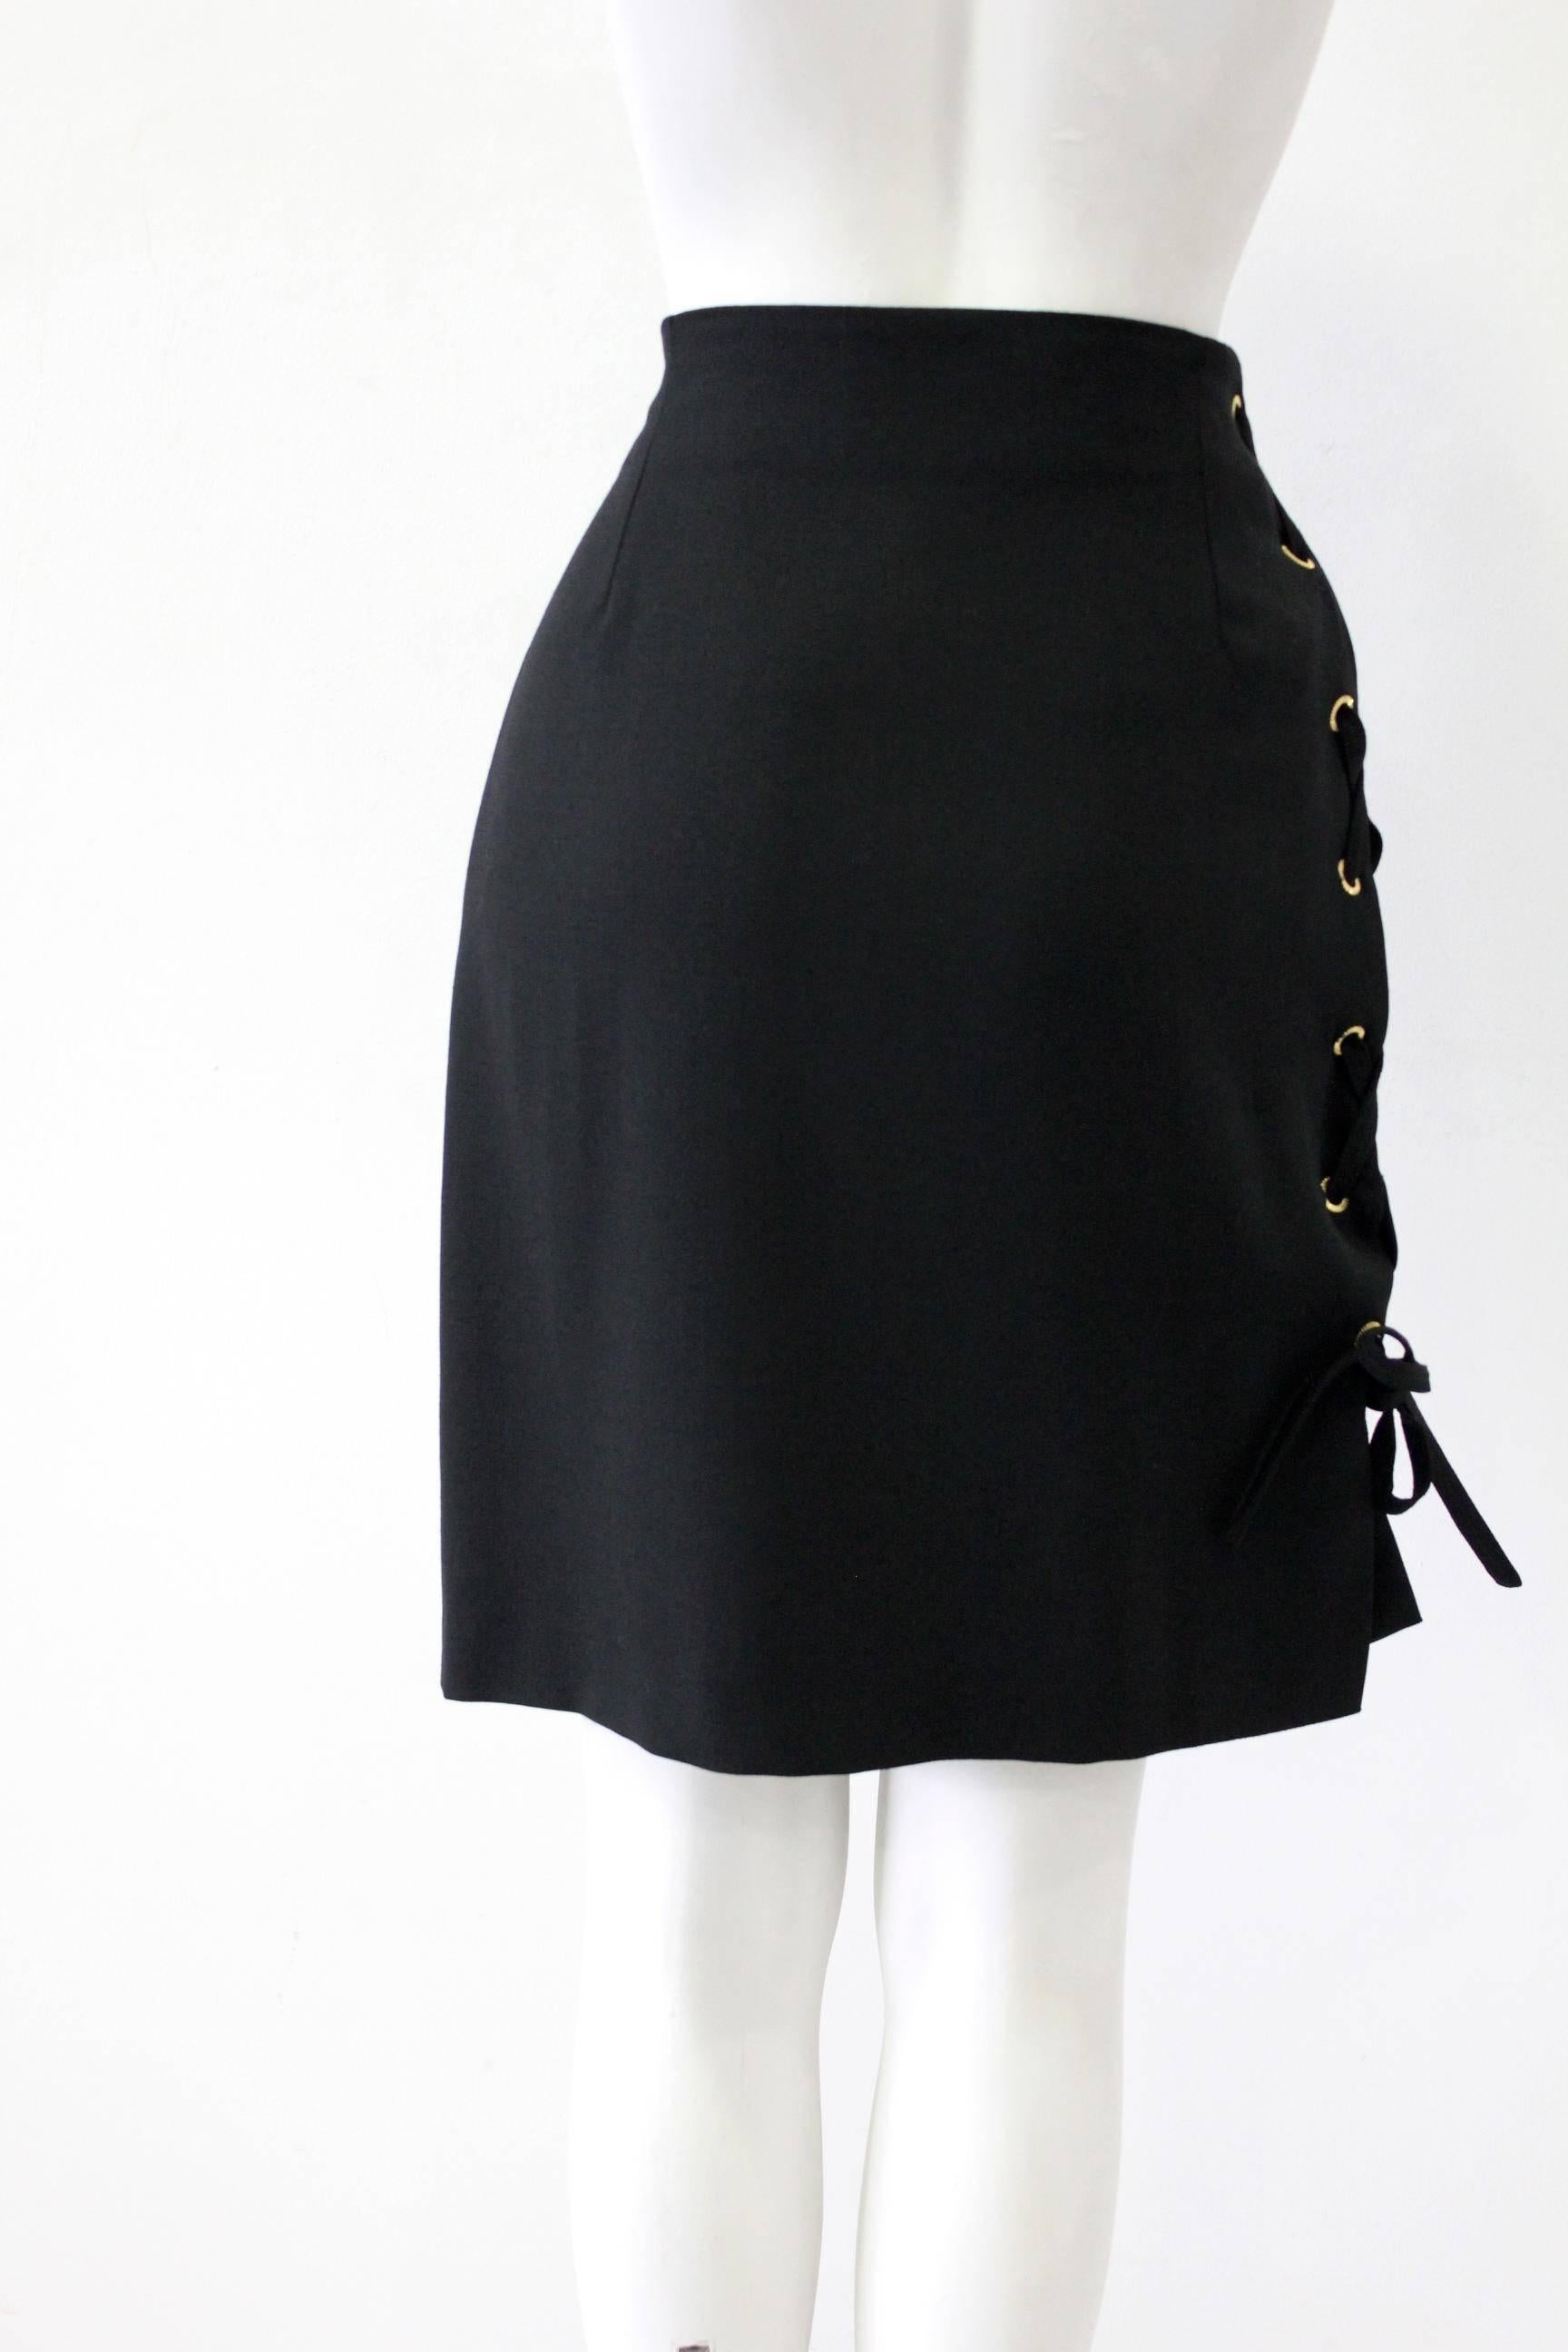 Black Istante By Gianni Versace Skirt With Lace-Up Detailing Fall 1992 For Sale